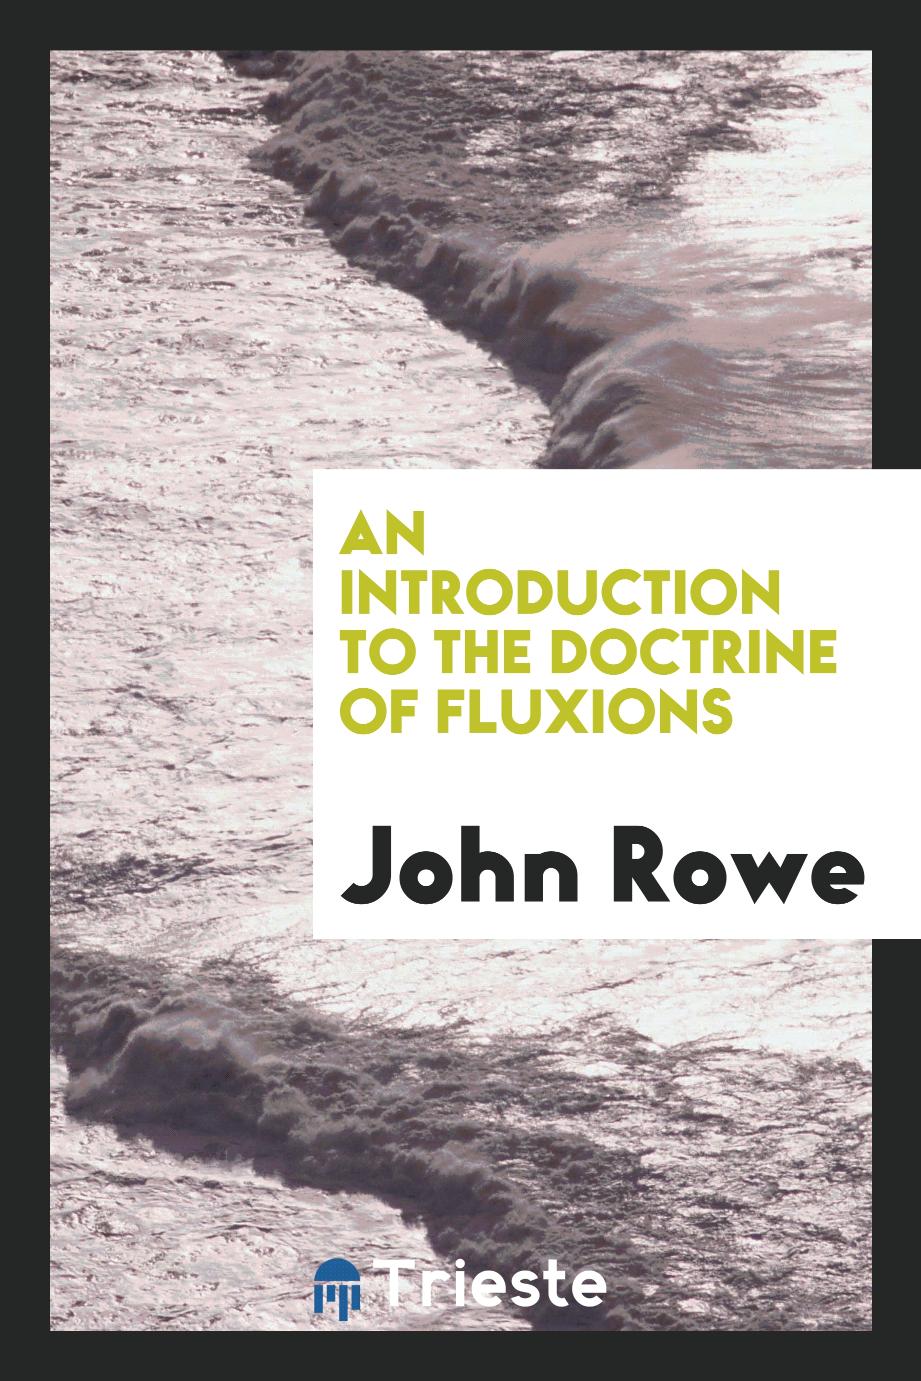 An Introduction to the Doctrine of Fluxions